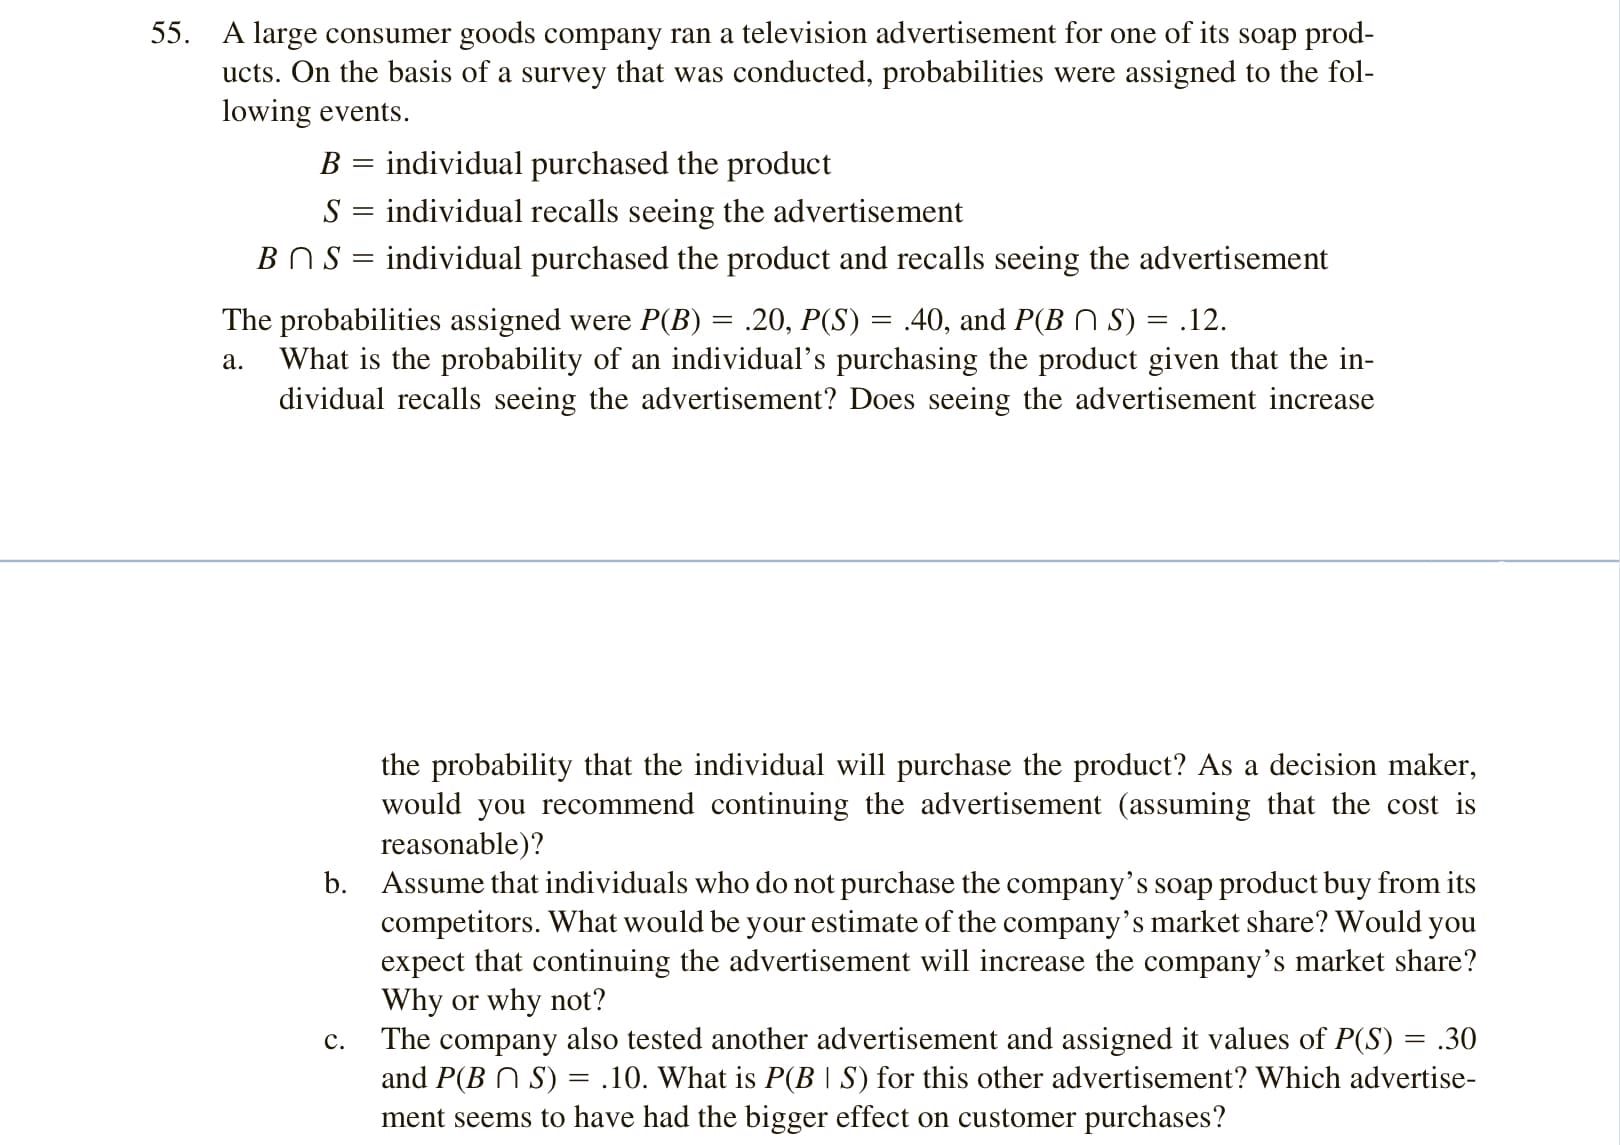 A large consumer goods company ran a television advertisement for one of its soap prod-
ucts. On the basis of a survey that was conducted, probabilities were assigned to the fol-
lowing events.
B = individual purchased the product
S = individual recalls seeing the advertisement
BNS = individual purchased the product and recalls seeing the advertisement
The probabilities assigned were P(B) = .20, P(S) = .40, and P(B N S) = .12.
What is the probability of an individual's purchasing the product given that the in-
dividual recalls seeing the advertisement? Does seeing the advertisement increase
а.
the probability that the individual will purchase the product? As a decision maker,
would you recommend continuing the advertisement (assuming that the cost is
reasonable)?
b. Assume that individuals who do not purchase the company’s soap product buy from its
competitors. What would be your estimate of the company’s market share? Would you
expect that continuing the advertisement will increase the company's market share?
Why or why not?
The company also tested another advertisement and assigned it values of P(S) = .30
and P(B N S) = .10. What is P(B | S) for this other advertisement? Which advertise-
ment seems to have had the bigger effect on customer purchases?
с.
